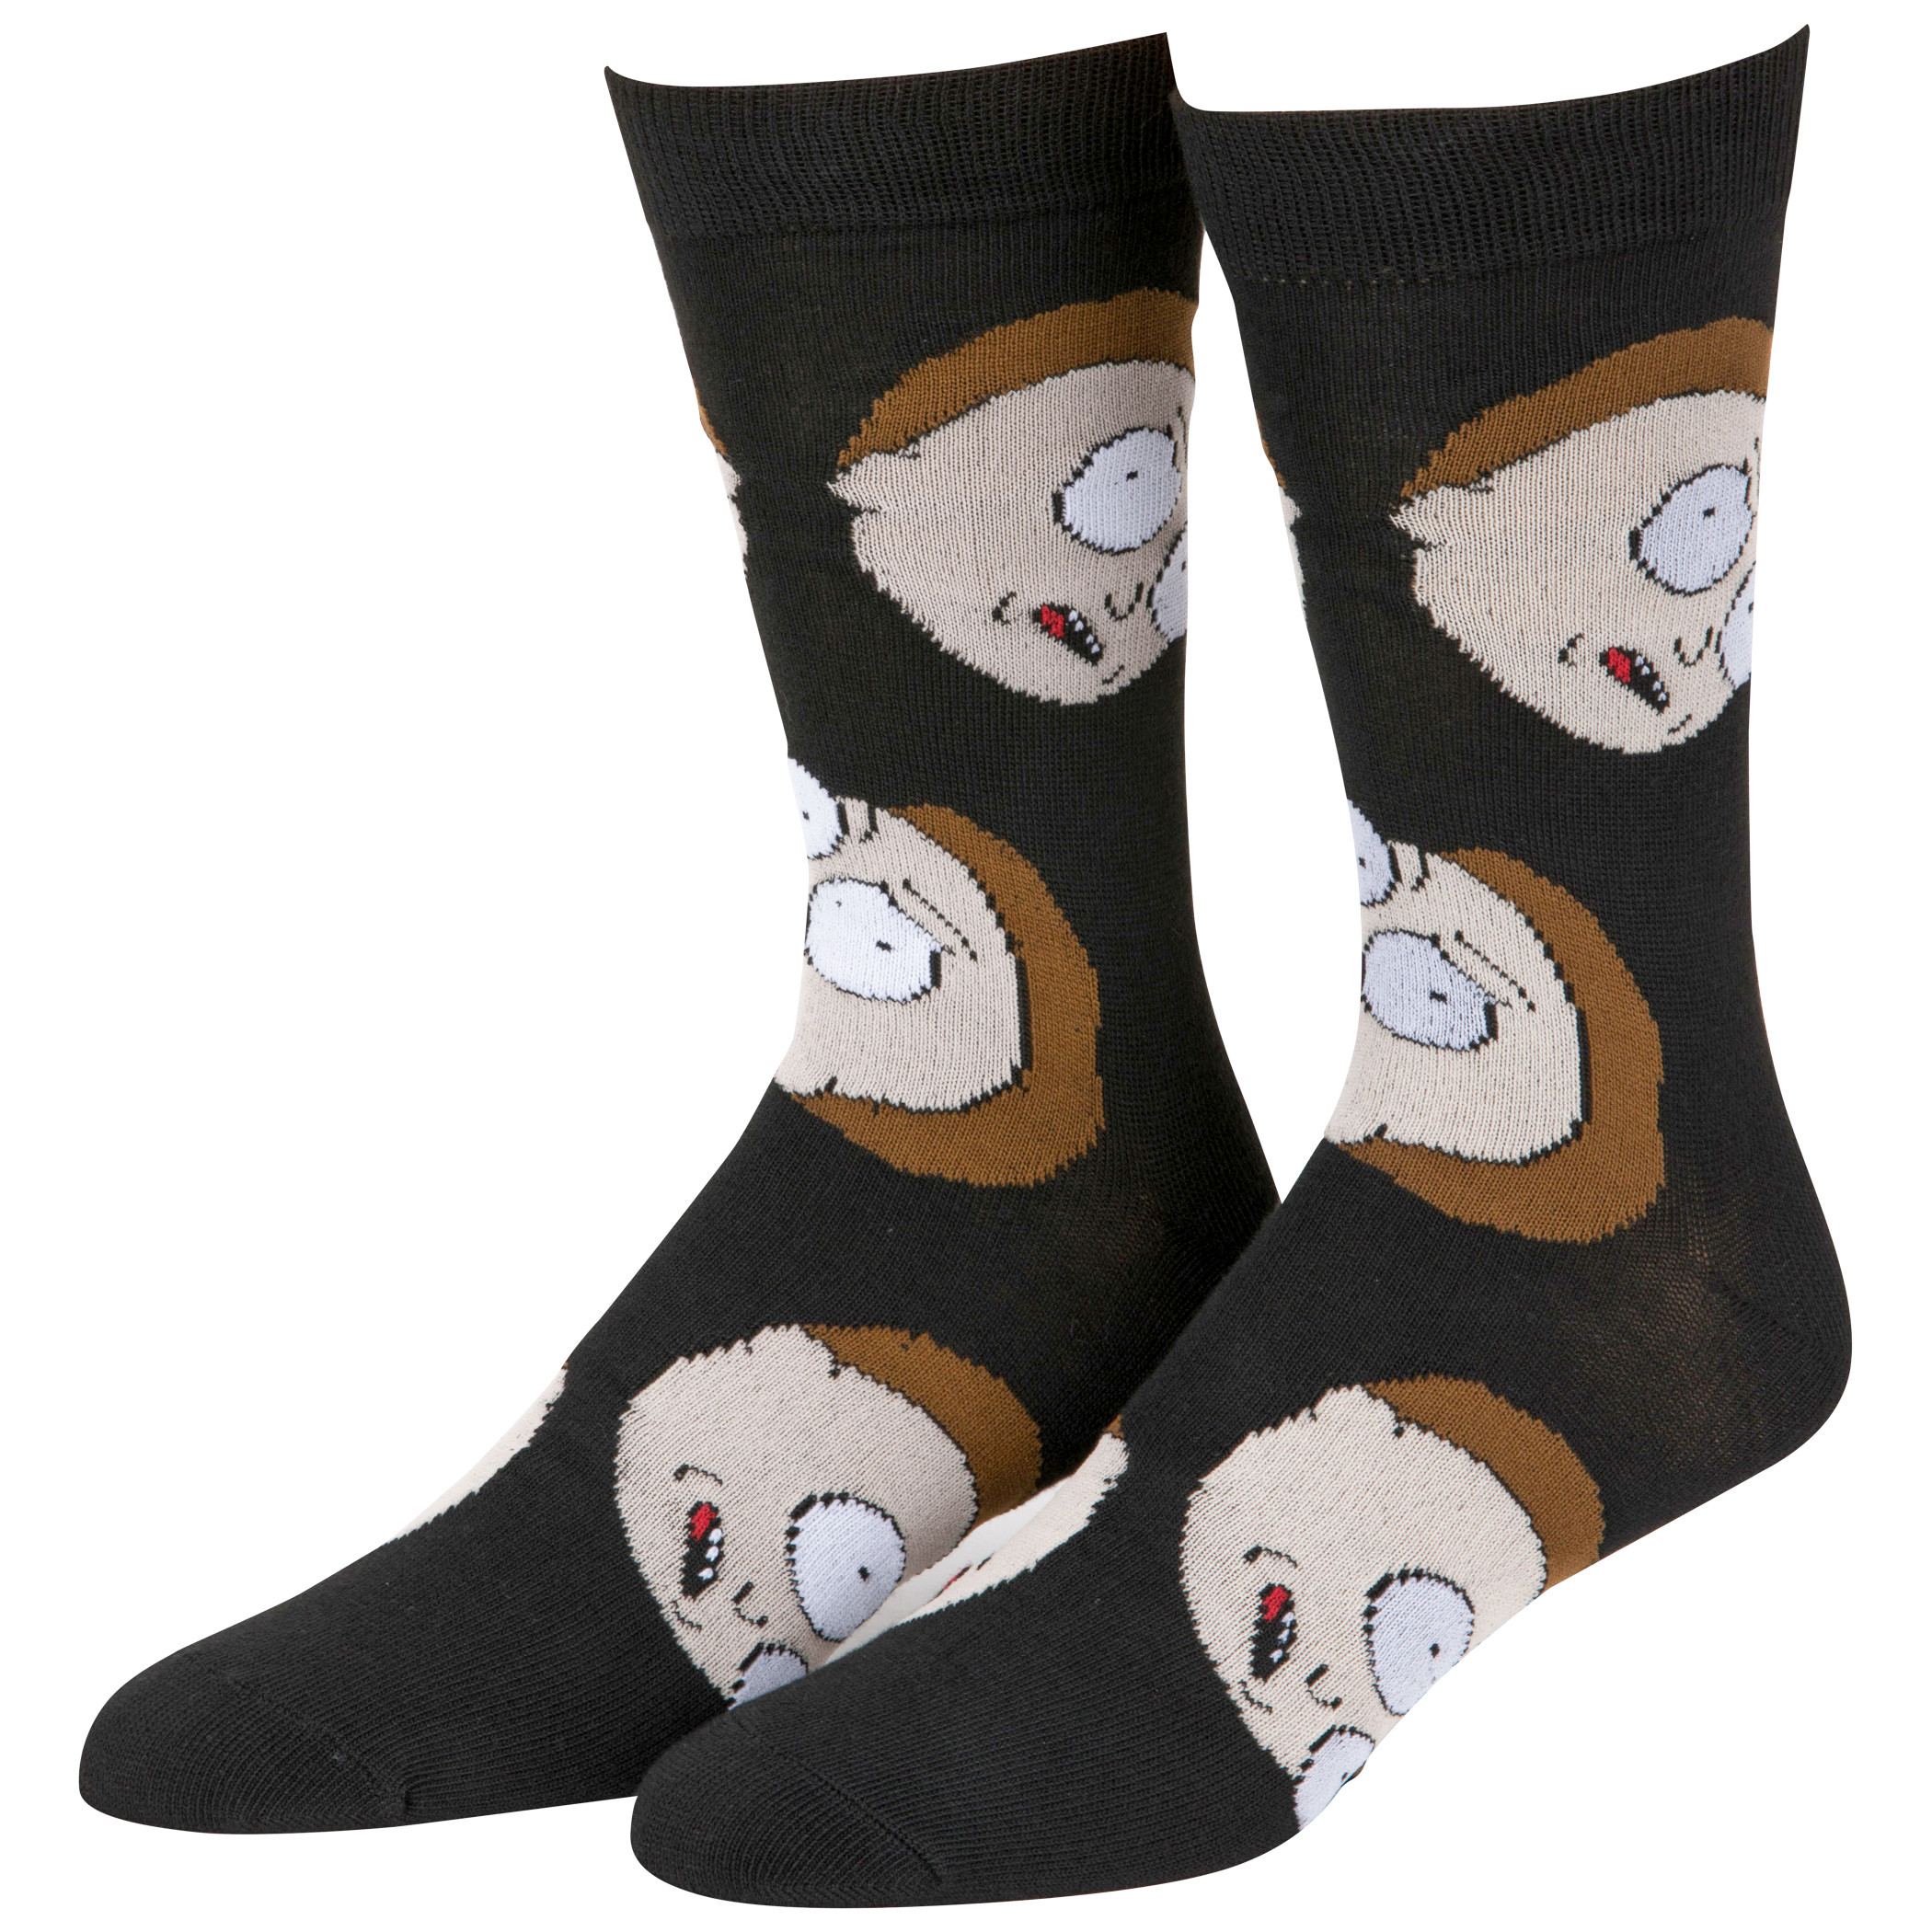 Rick and Morty Characters 6-Pack Crew Socks